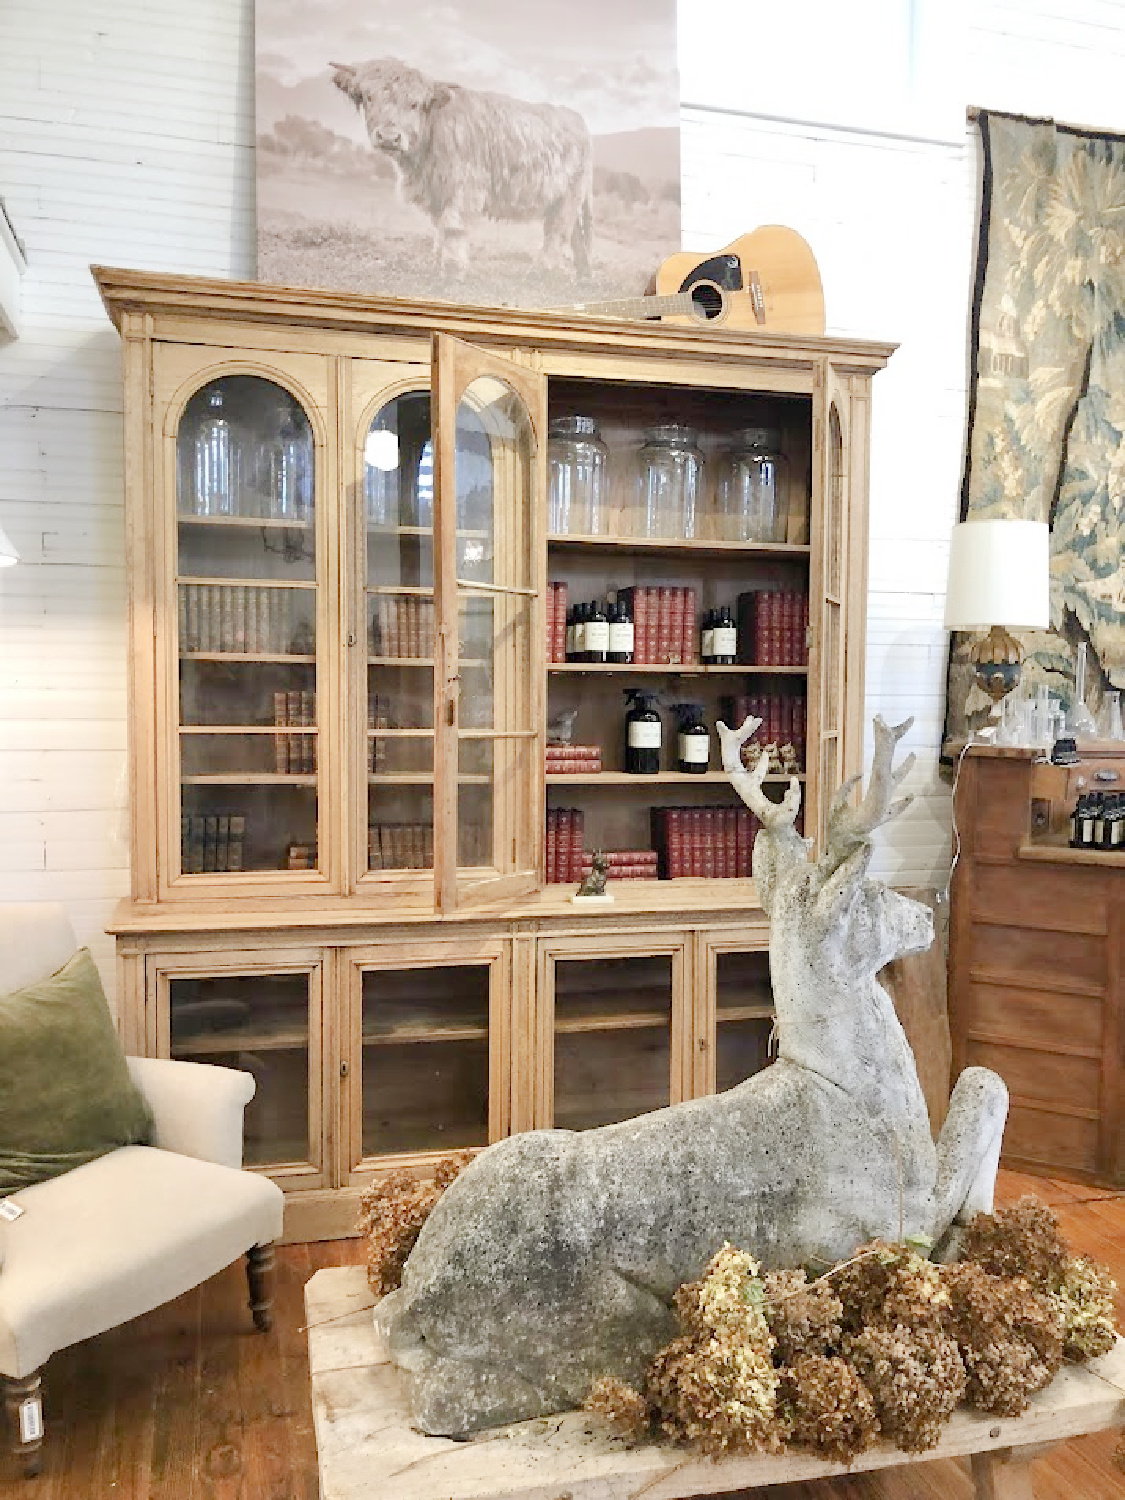 European country antiques near Franklin - Patina Home & Garden shop from Giannettis in Leiper's Fork, TN - Hello Lovely Studio. #patinahome #leipersforktn